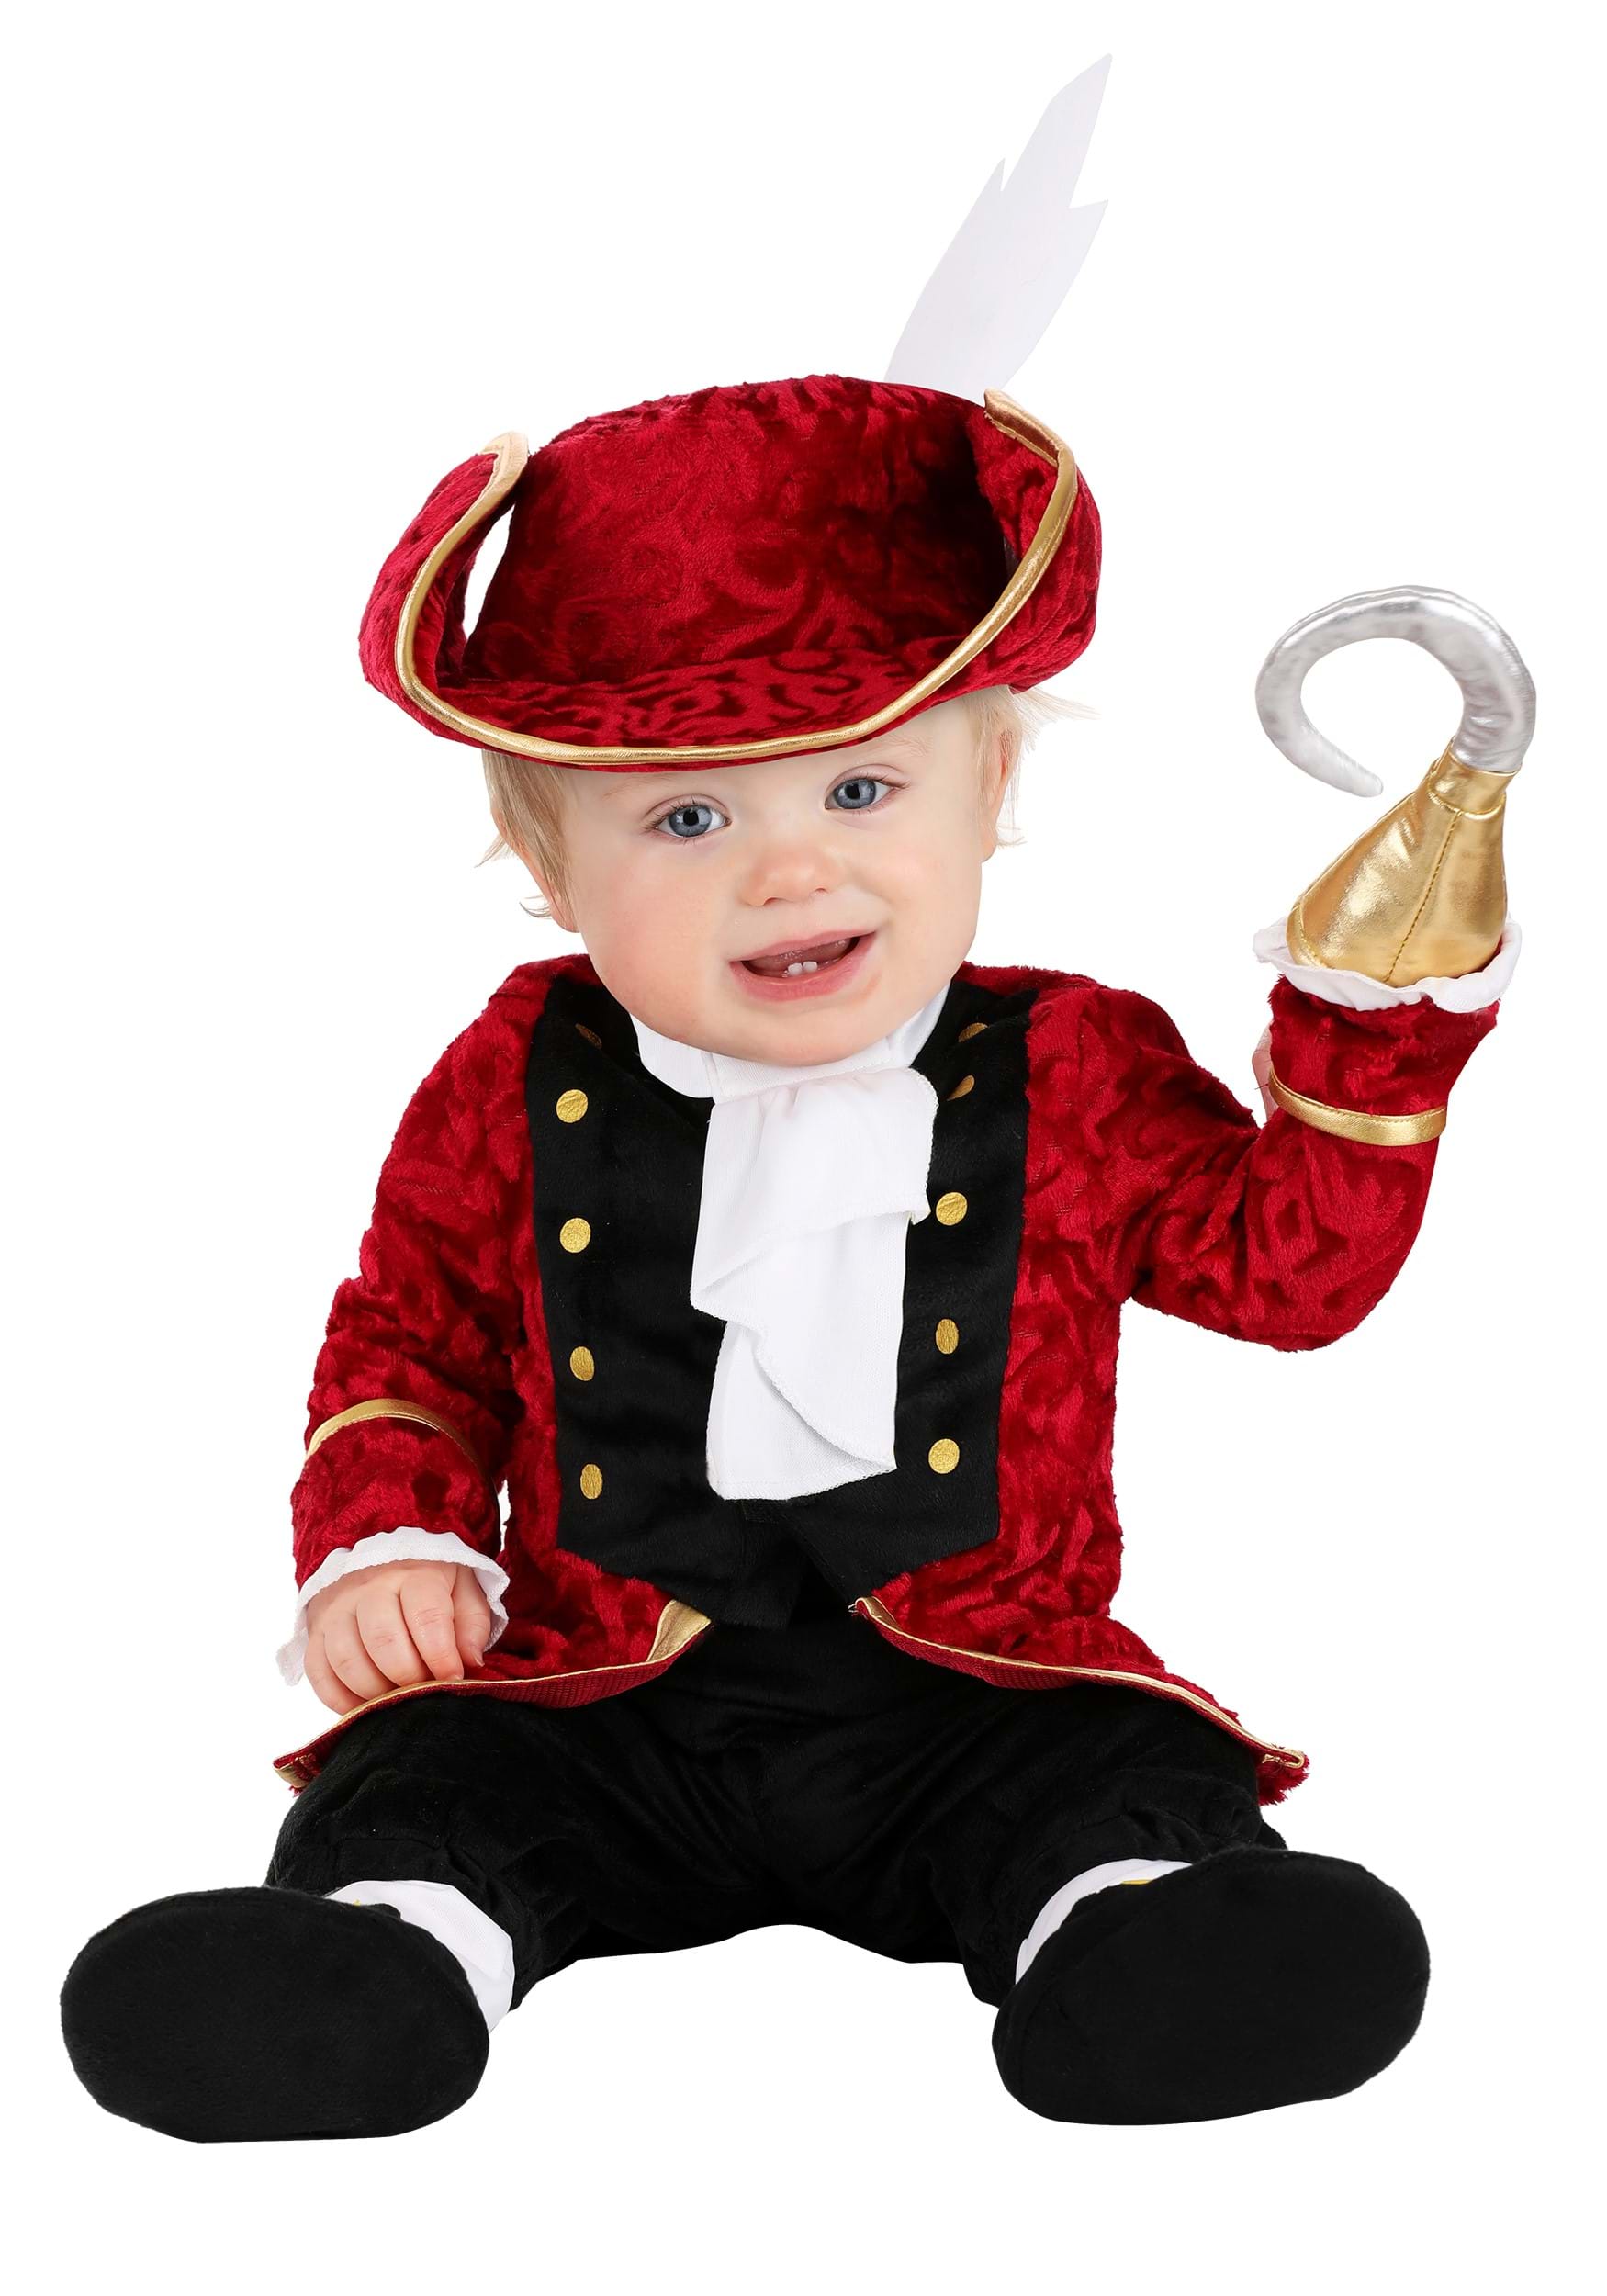 https://images.halloweencostumes.com/products/74755/1-1/infant-charming-captain-hook-costume.jpg